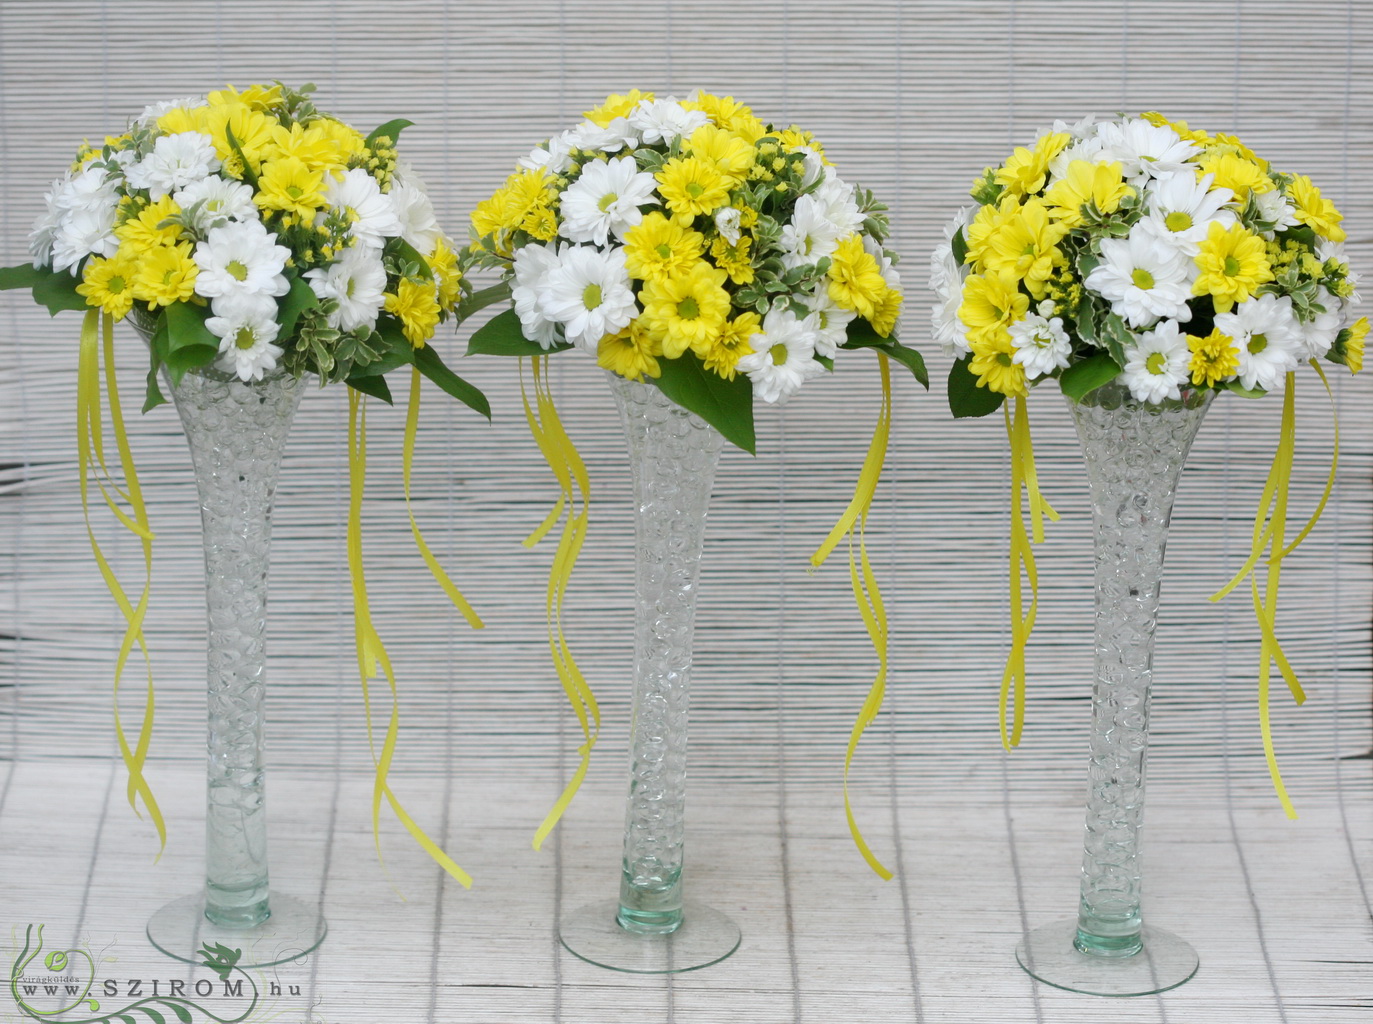 flower delivery Budapest - Tall vases with daisies 1 pc (yellow, white), wedding